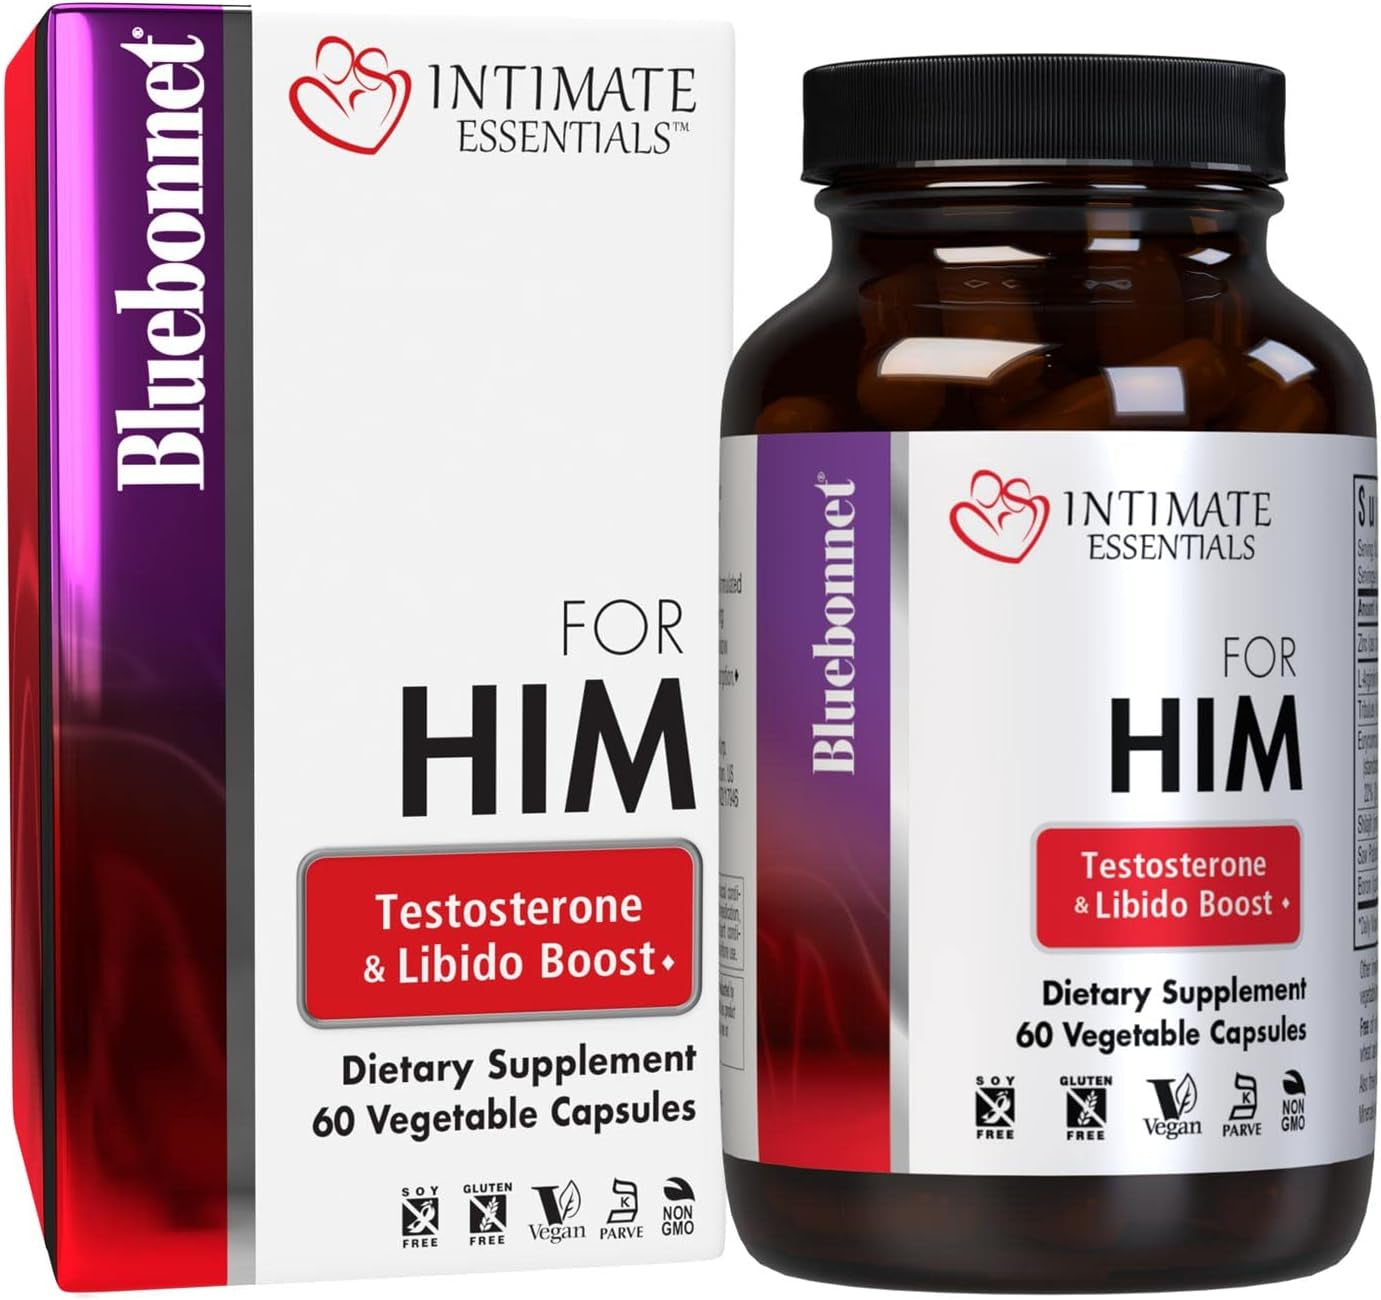 Nutrition Intimate Essentials for Him Testosterone & Libido Boost, Soy-Free, Gluten-Free, Non-Gmo, Dairy-Free, Kosher Certified, Vegan, 60 Capsules, 30 Serving